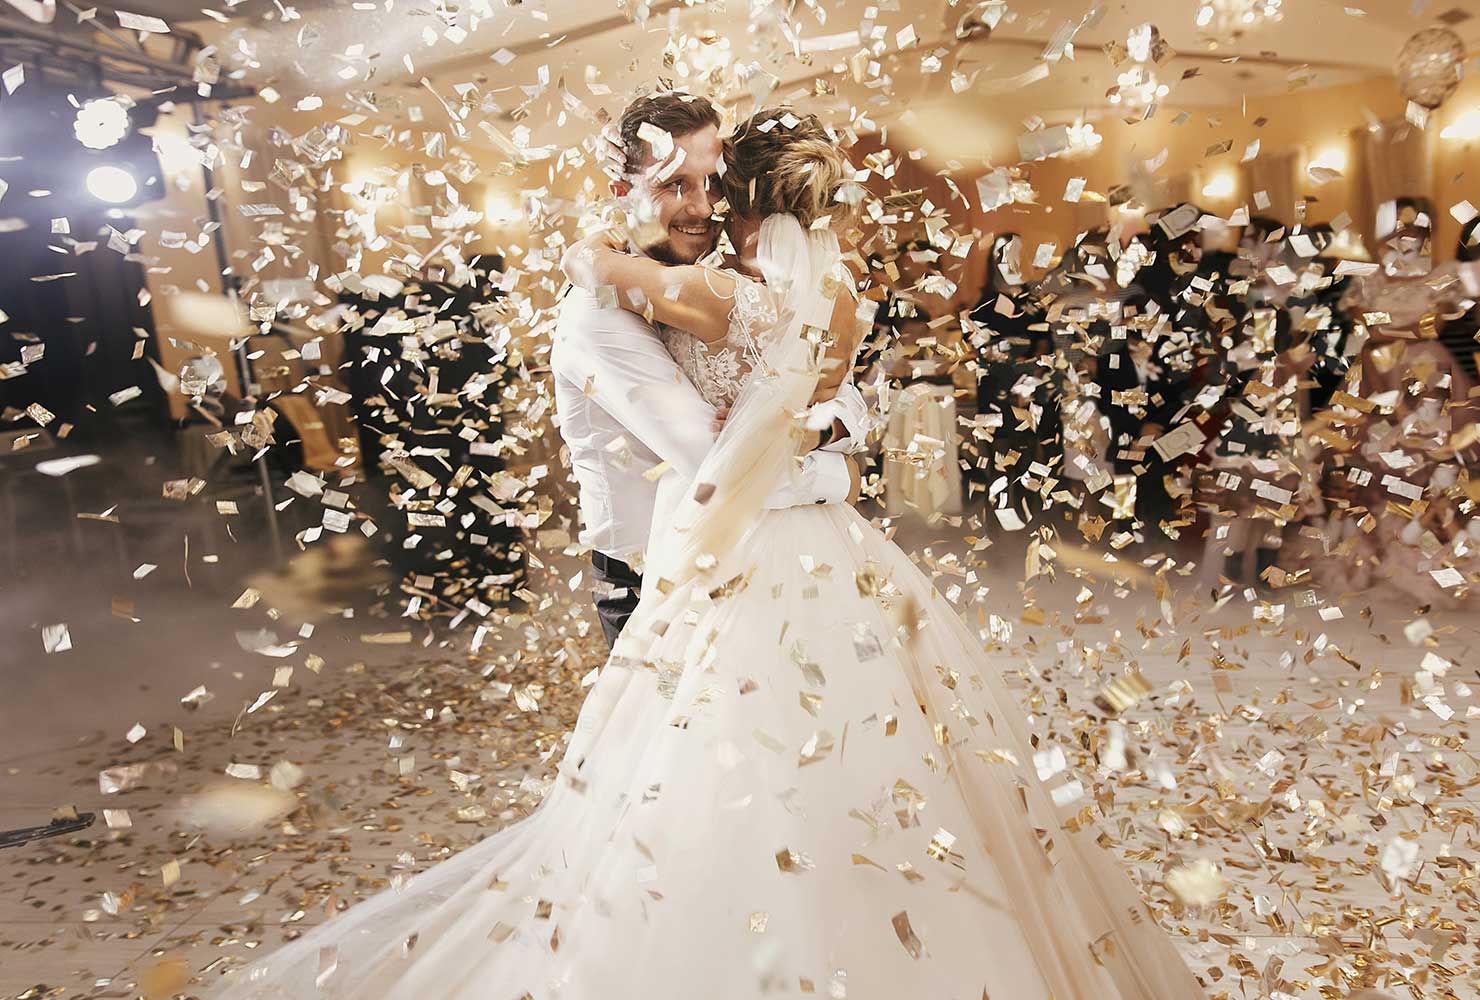 Married couple dancing under confetti.